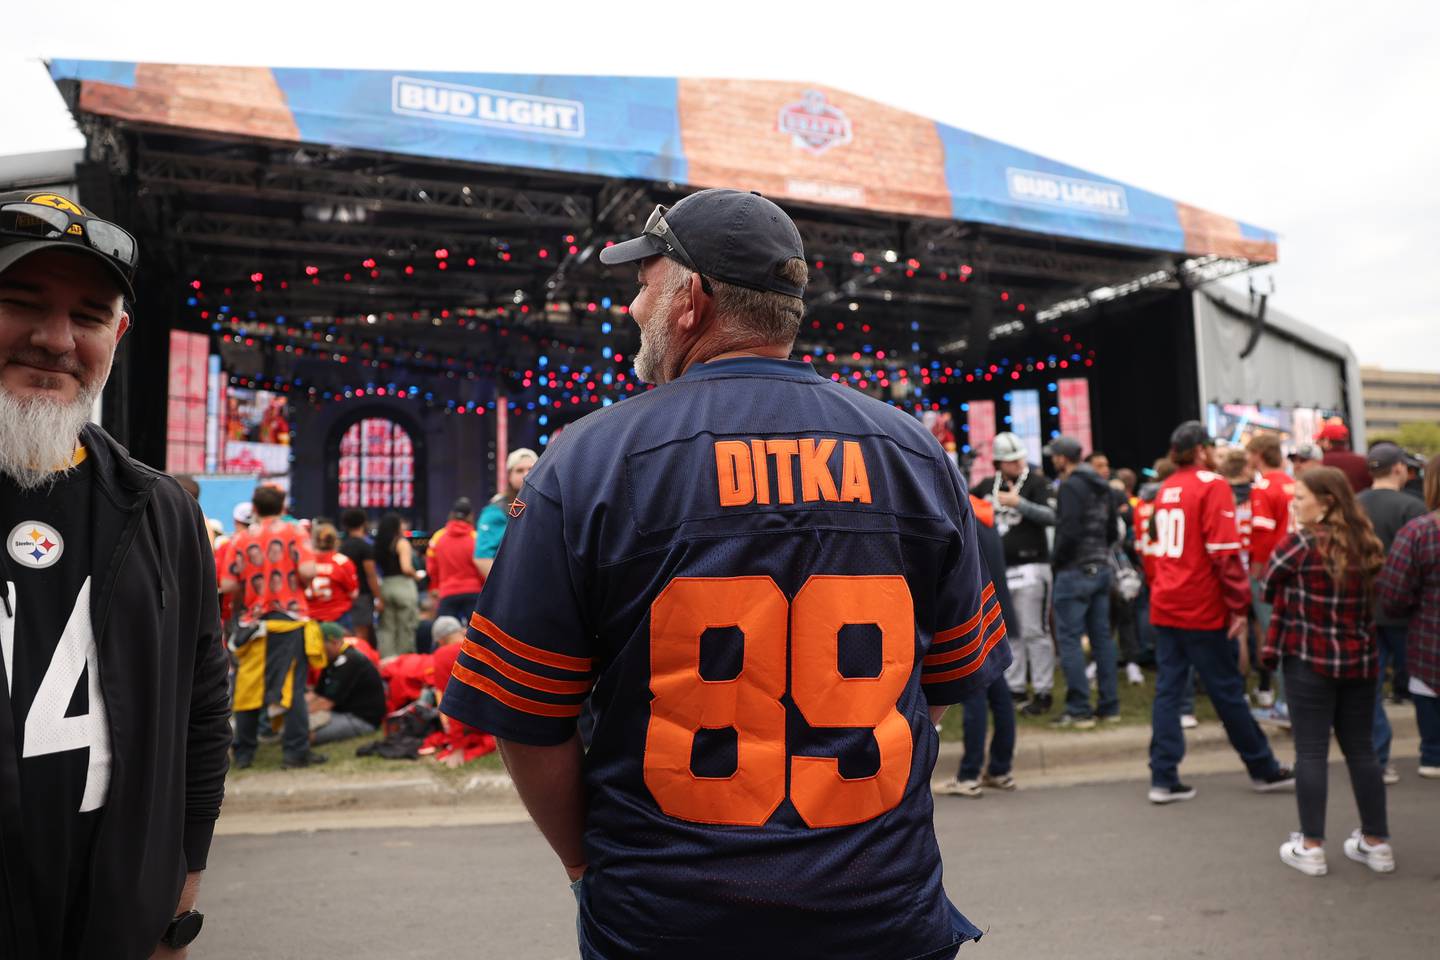 Jake Aills, from Salina, Kansas, wears a Ditka jersey for the first day of the 2023 NFL Draft on Thursday, April 27, 2023 in Kansas City, MO.